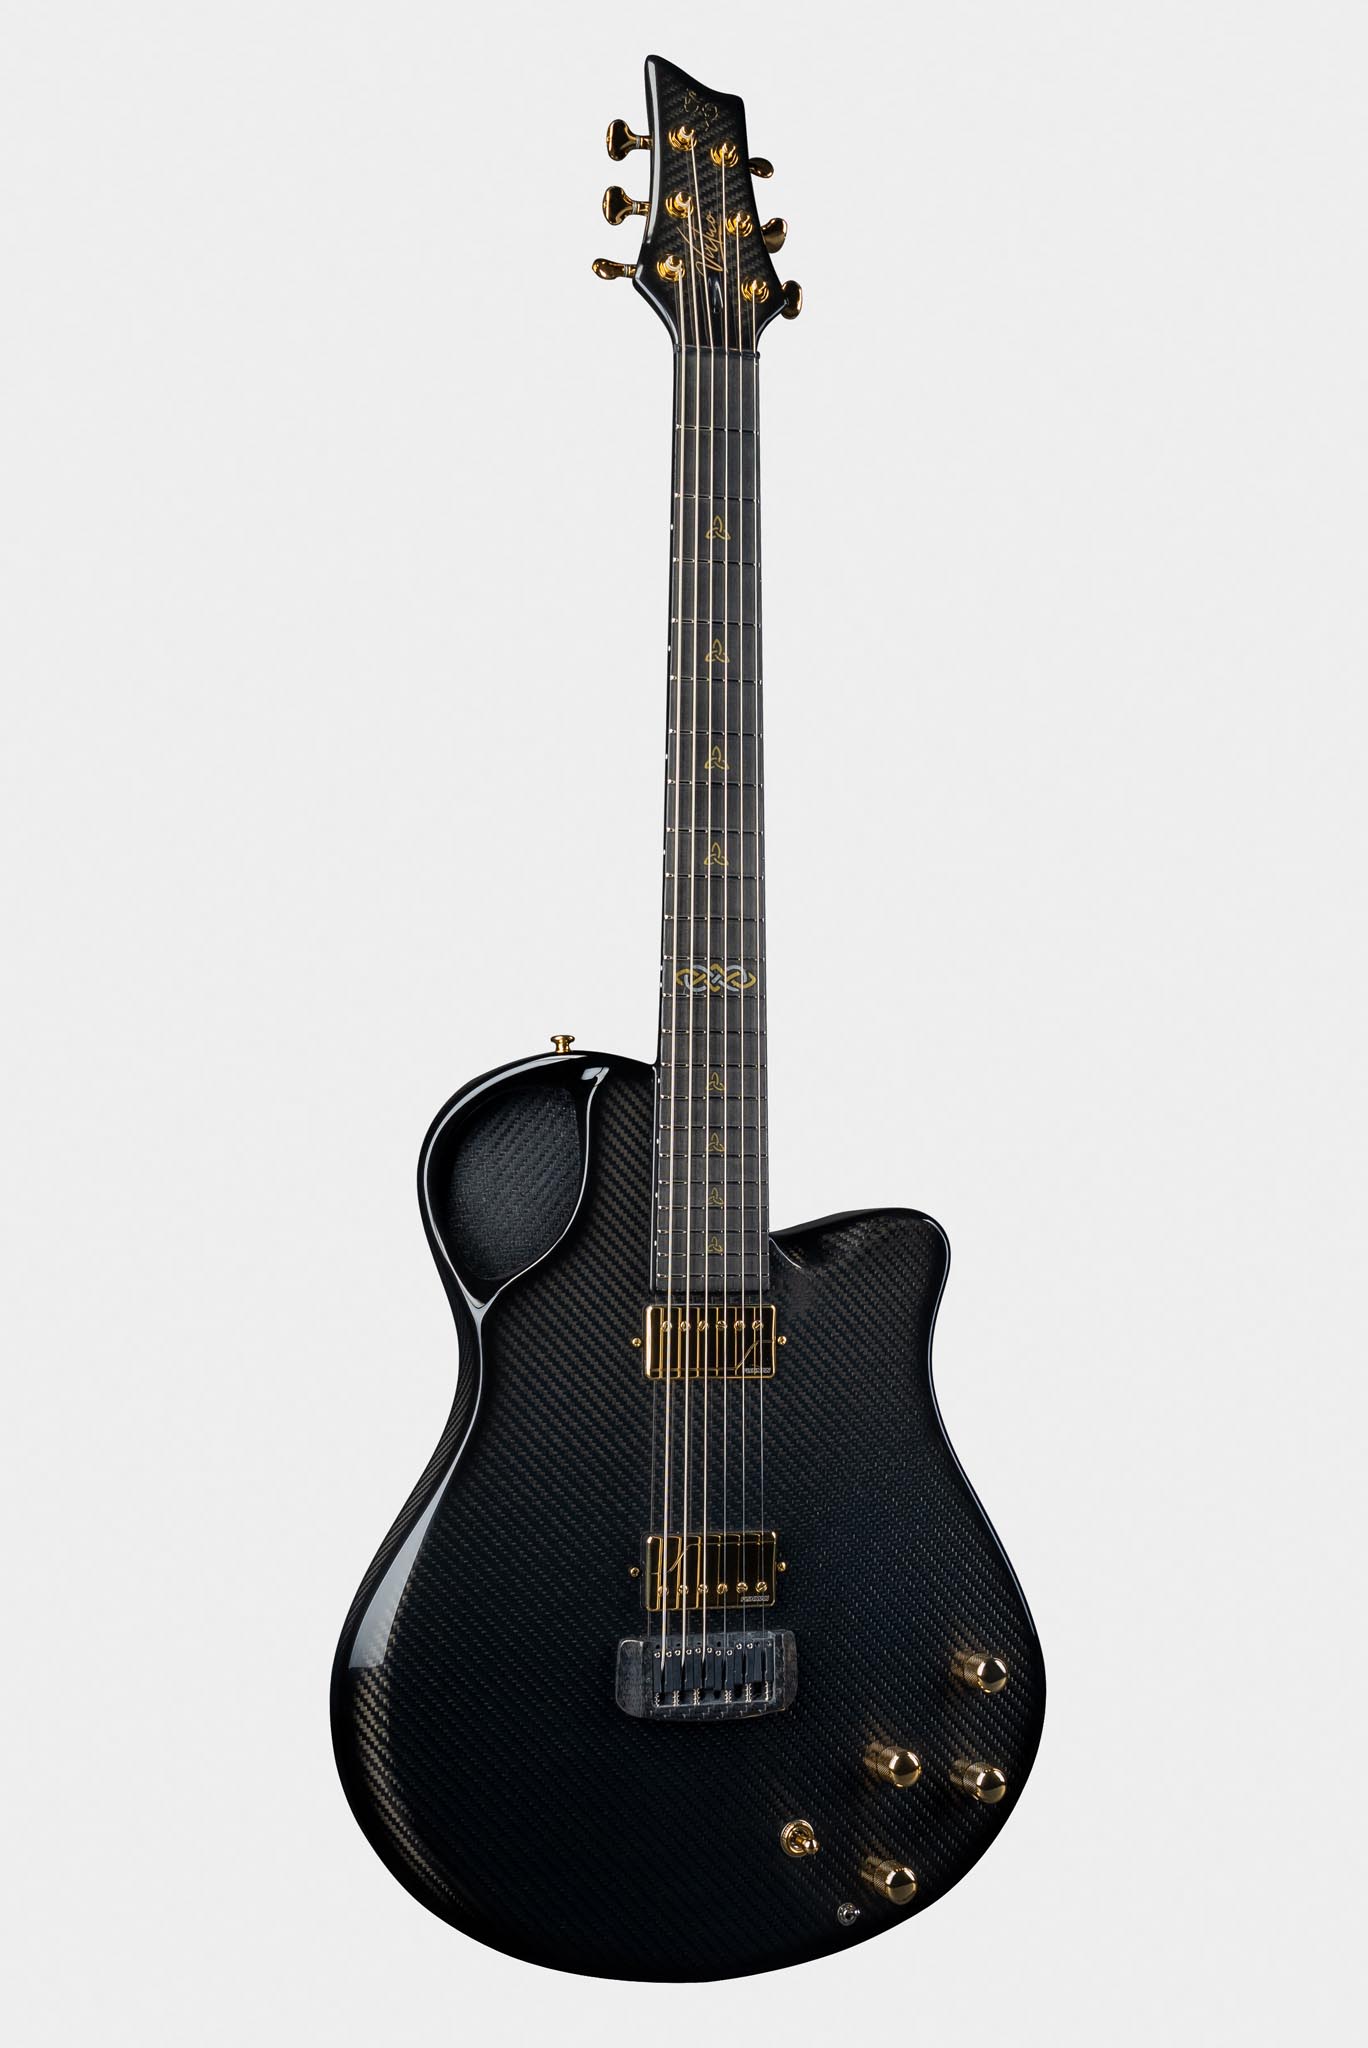 Black Emerald Guitars Virtuo model with gold details